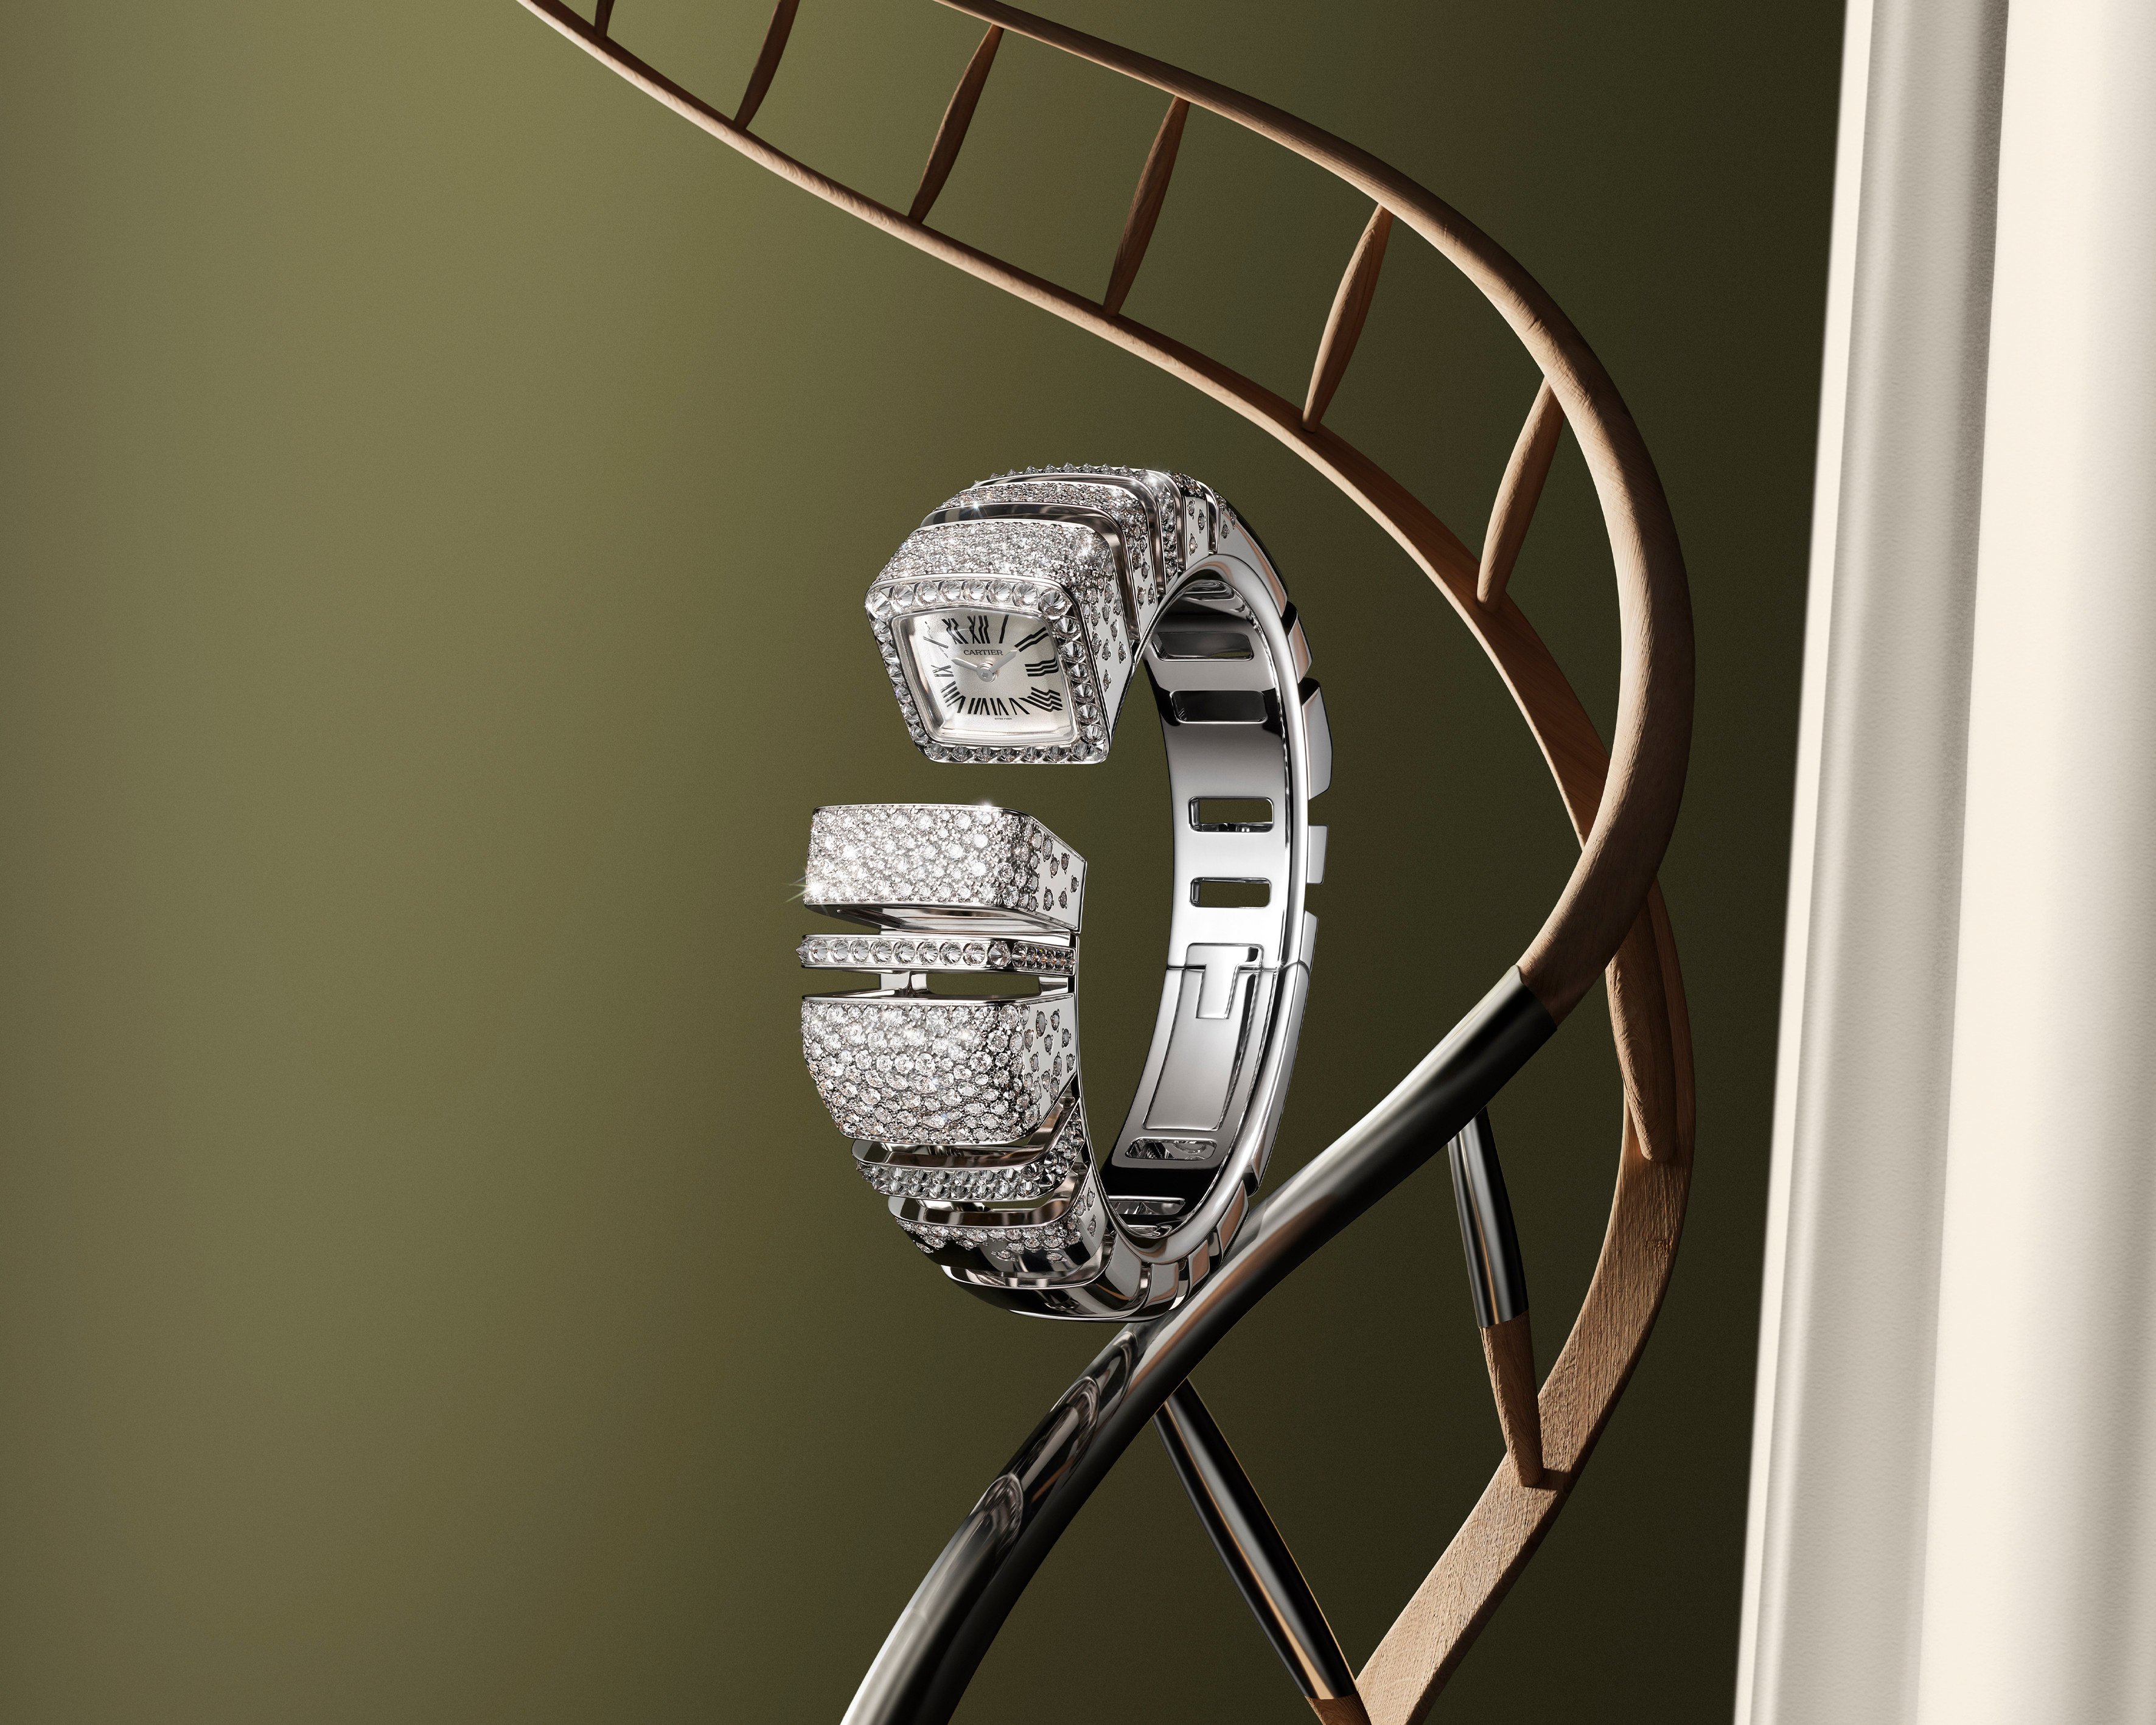 The Reflection de Cartier was among the French jeweller’s showpieces at Watches and Wonders. Photo: Handout